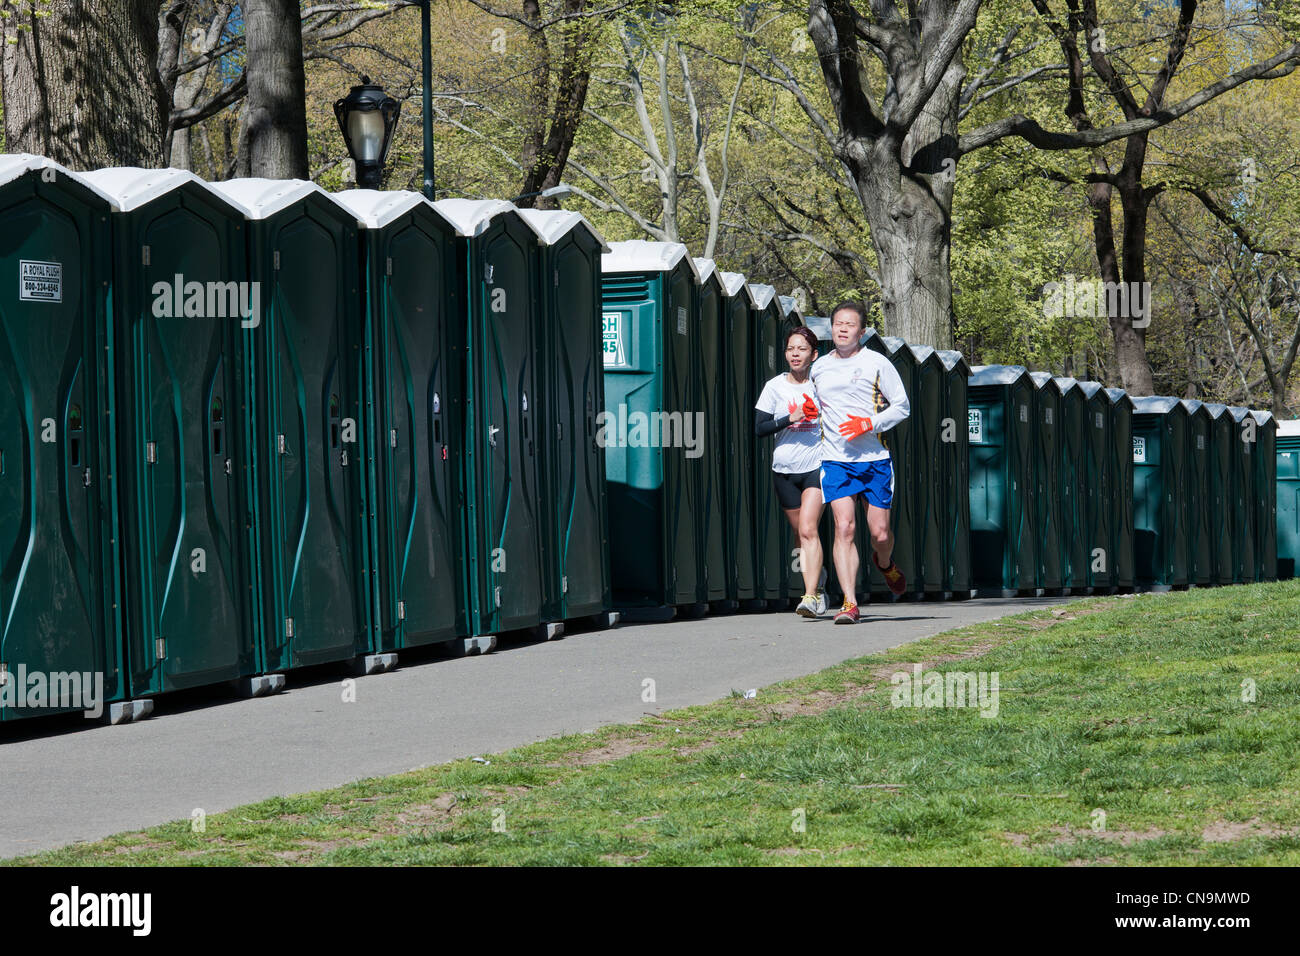 A line of portable toilets, conveniently placed for the starting line of a race, are seen in Central Park in New York Stock Photo